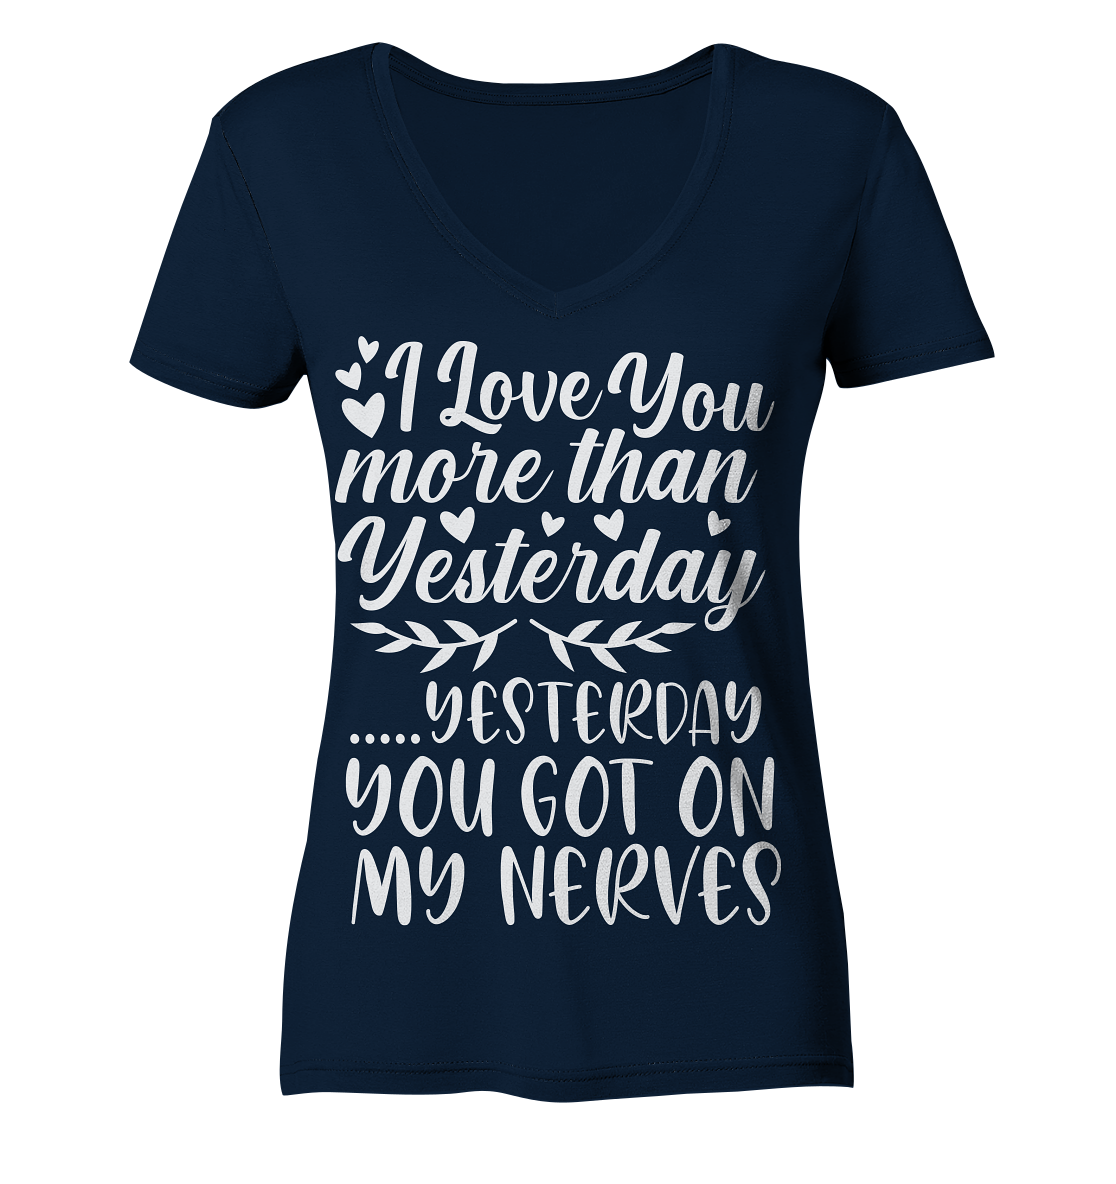 I love you more than yesterday  - Ladies V-Neck Shirt